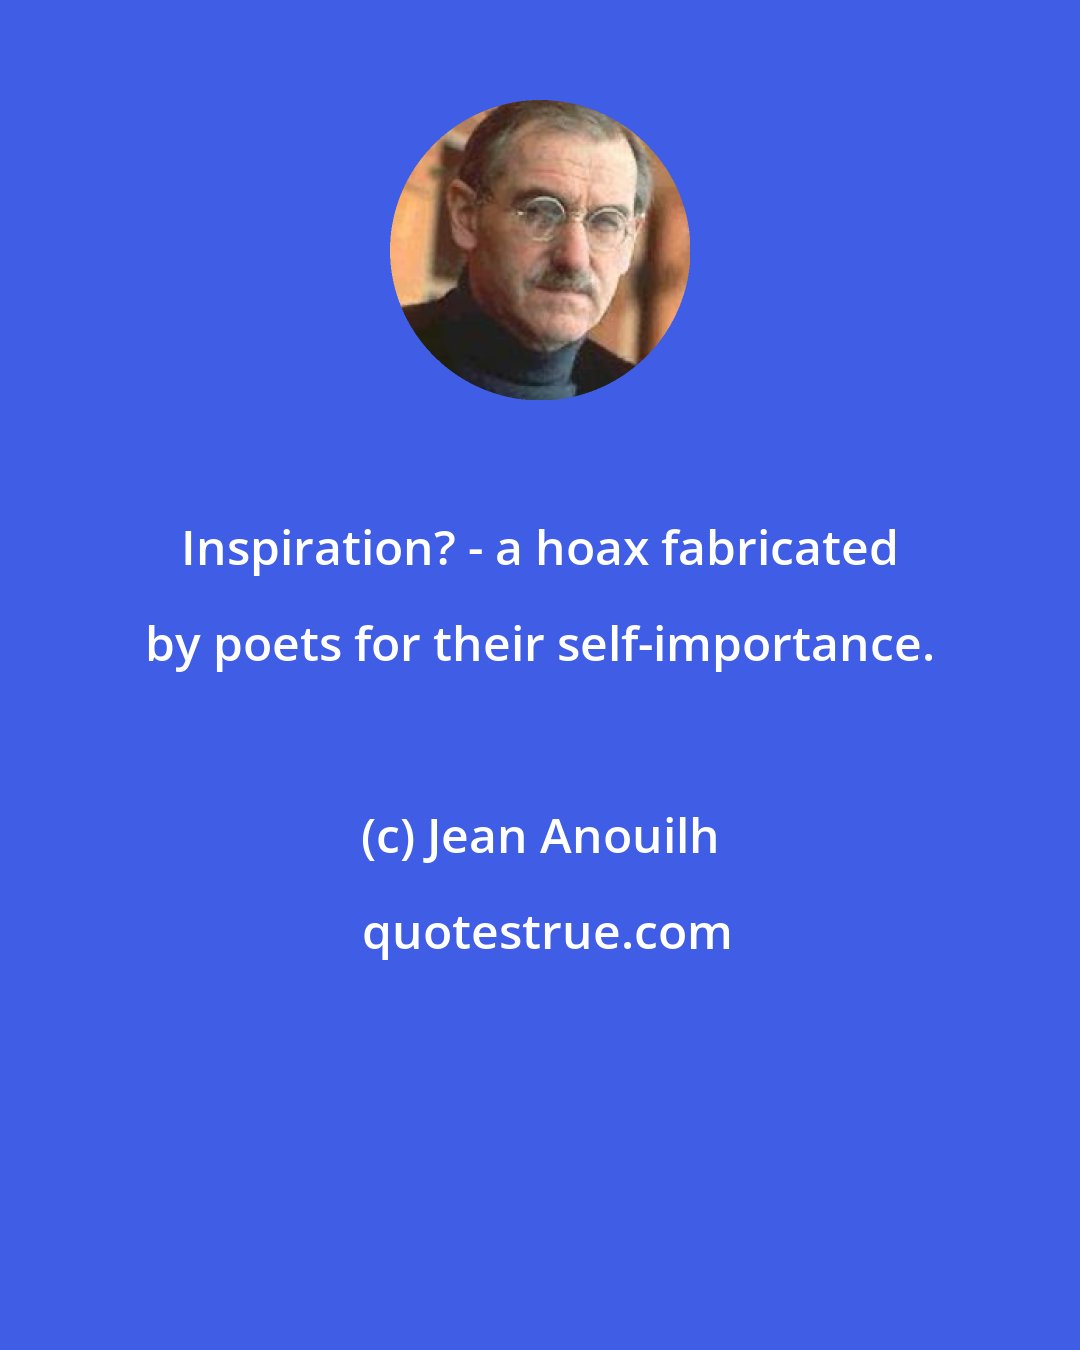 Jean Anouilh: Inspiration? - a hoax fabricated by poets for their self-importance.